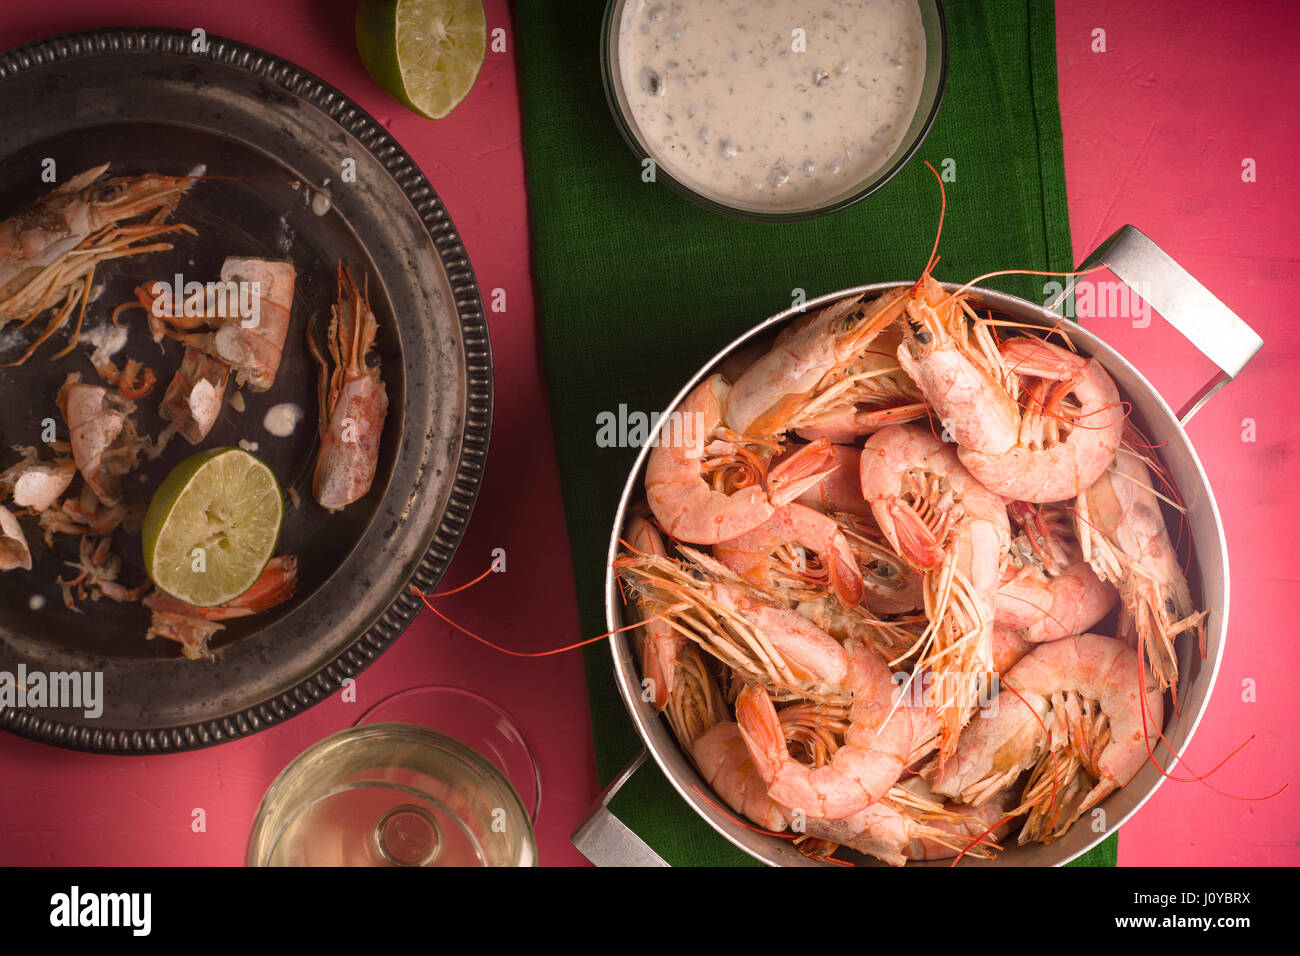 Shrimp on a pink table, glass with white wine and sauce Stock Photo